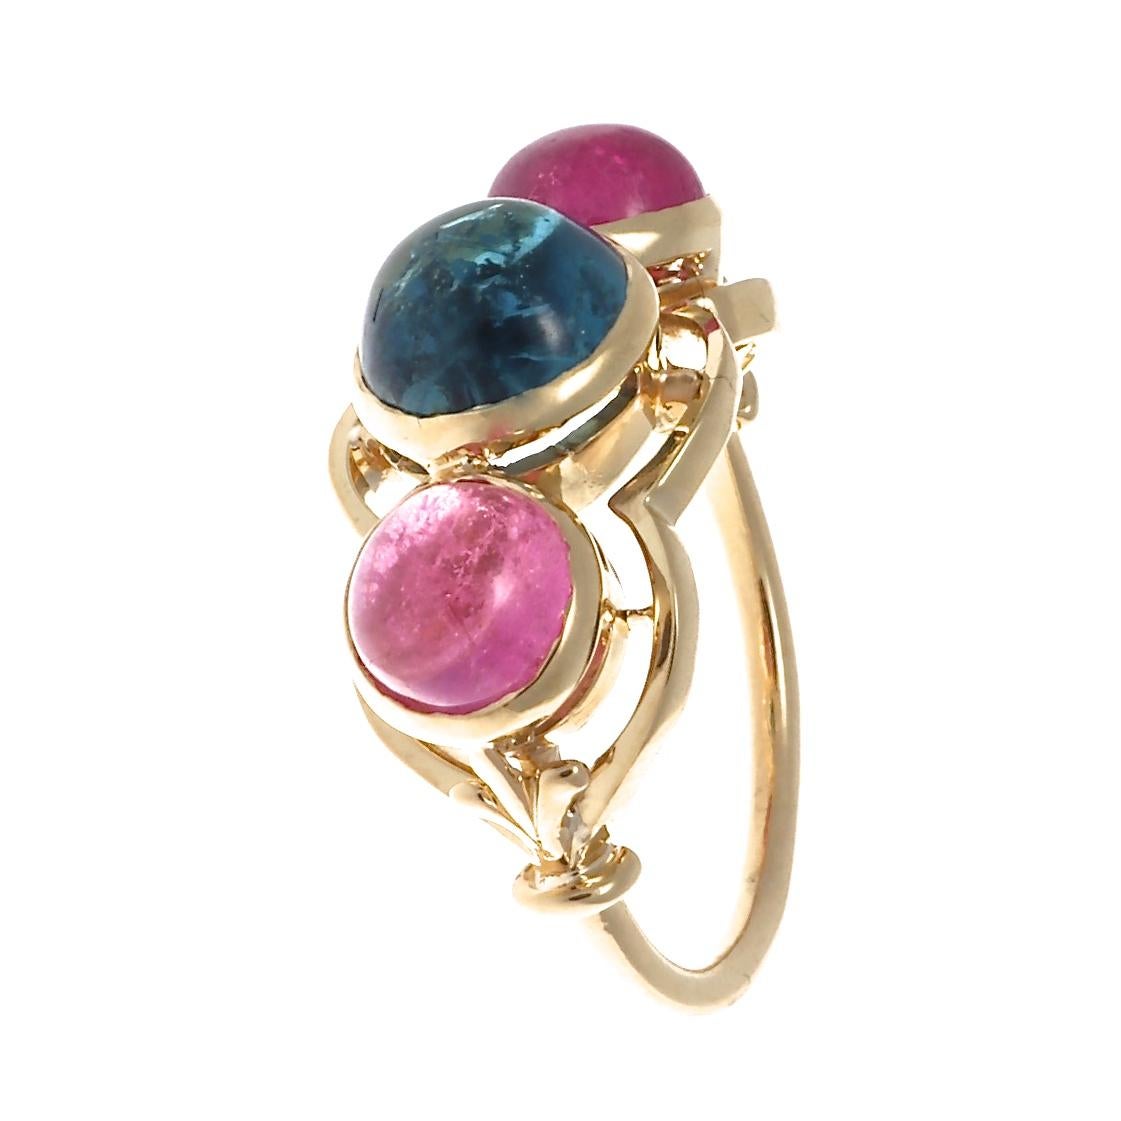 The pink and blue tourmaline for this lovely 18k setting is the perfect fit and complement one another so beautifully. The pink tourmaline cabochons weigh approximately 1.05 carats each, and one blue tourmaline weighs approximately 1.90 carats.